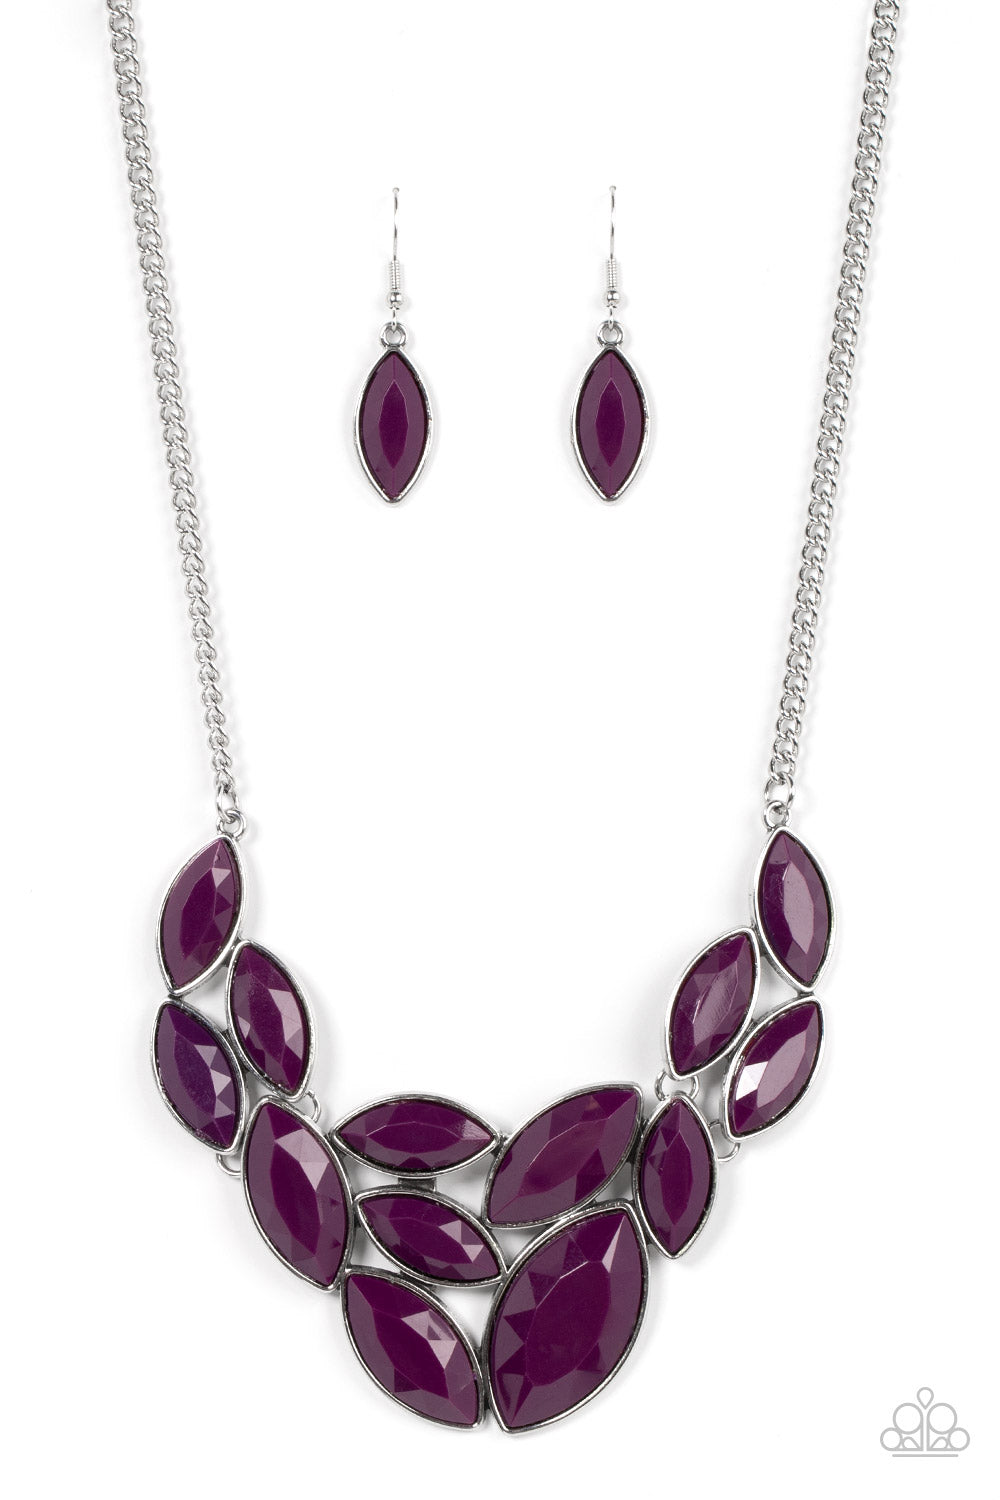 Purple Necklace Pear Bridal Jewelry Crystal Necklace Bridesmaid Gift D –  Little Desirez Jewelry